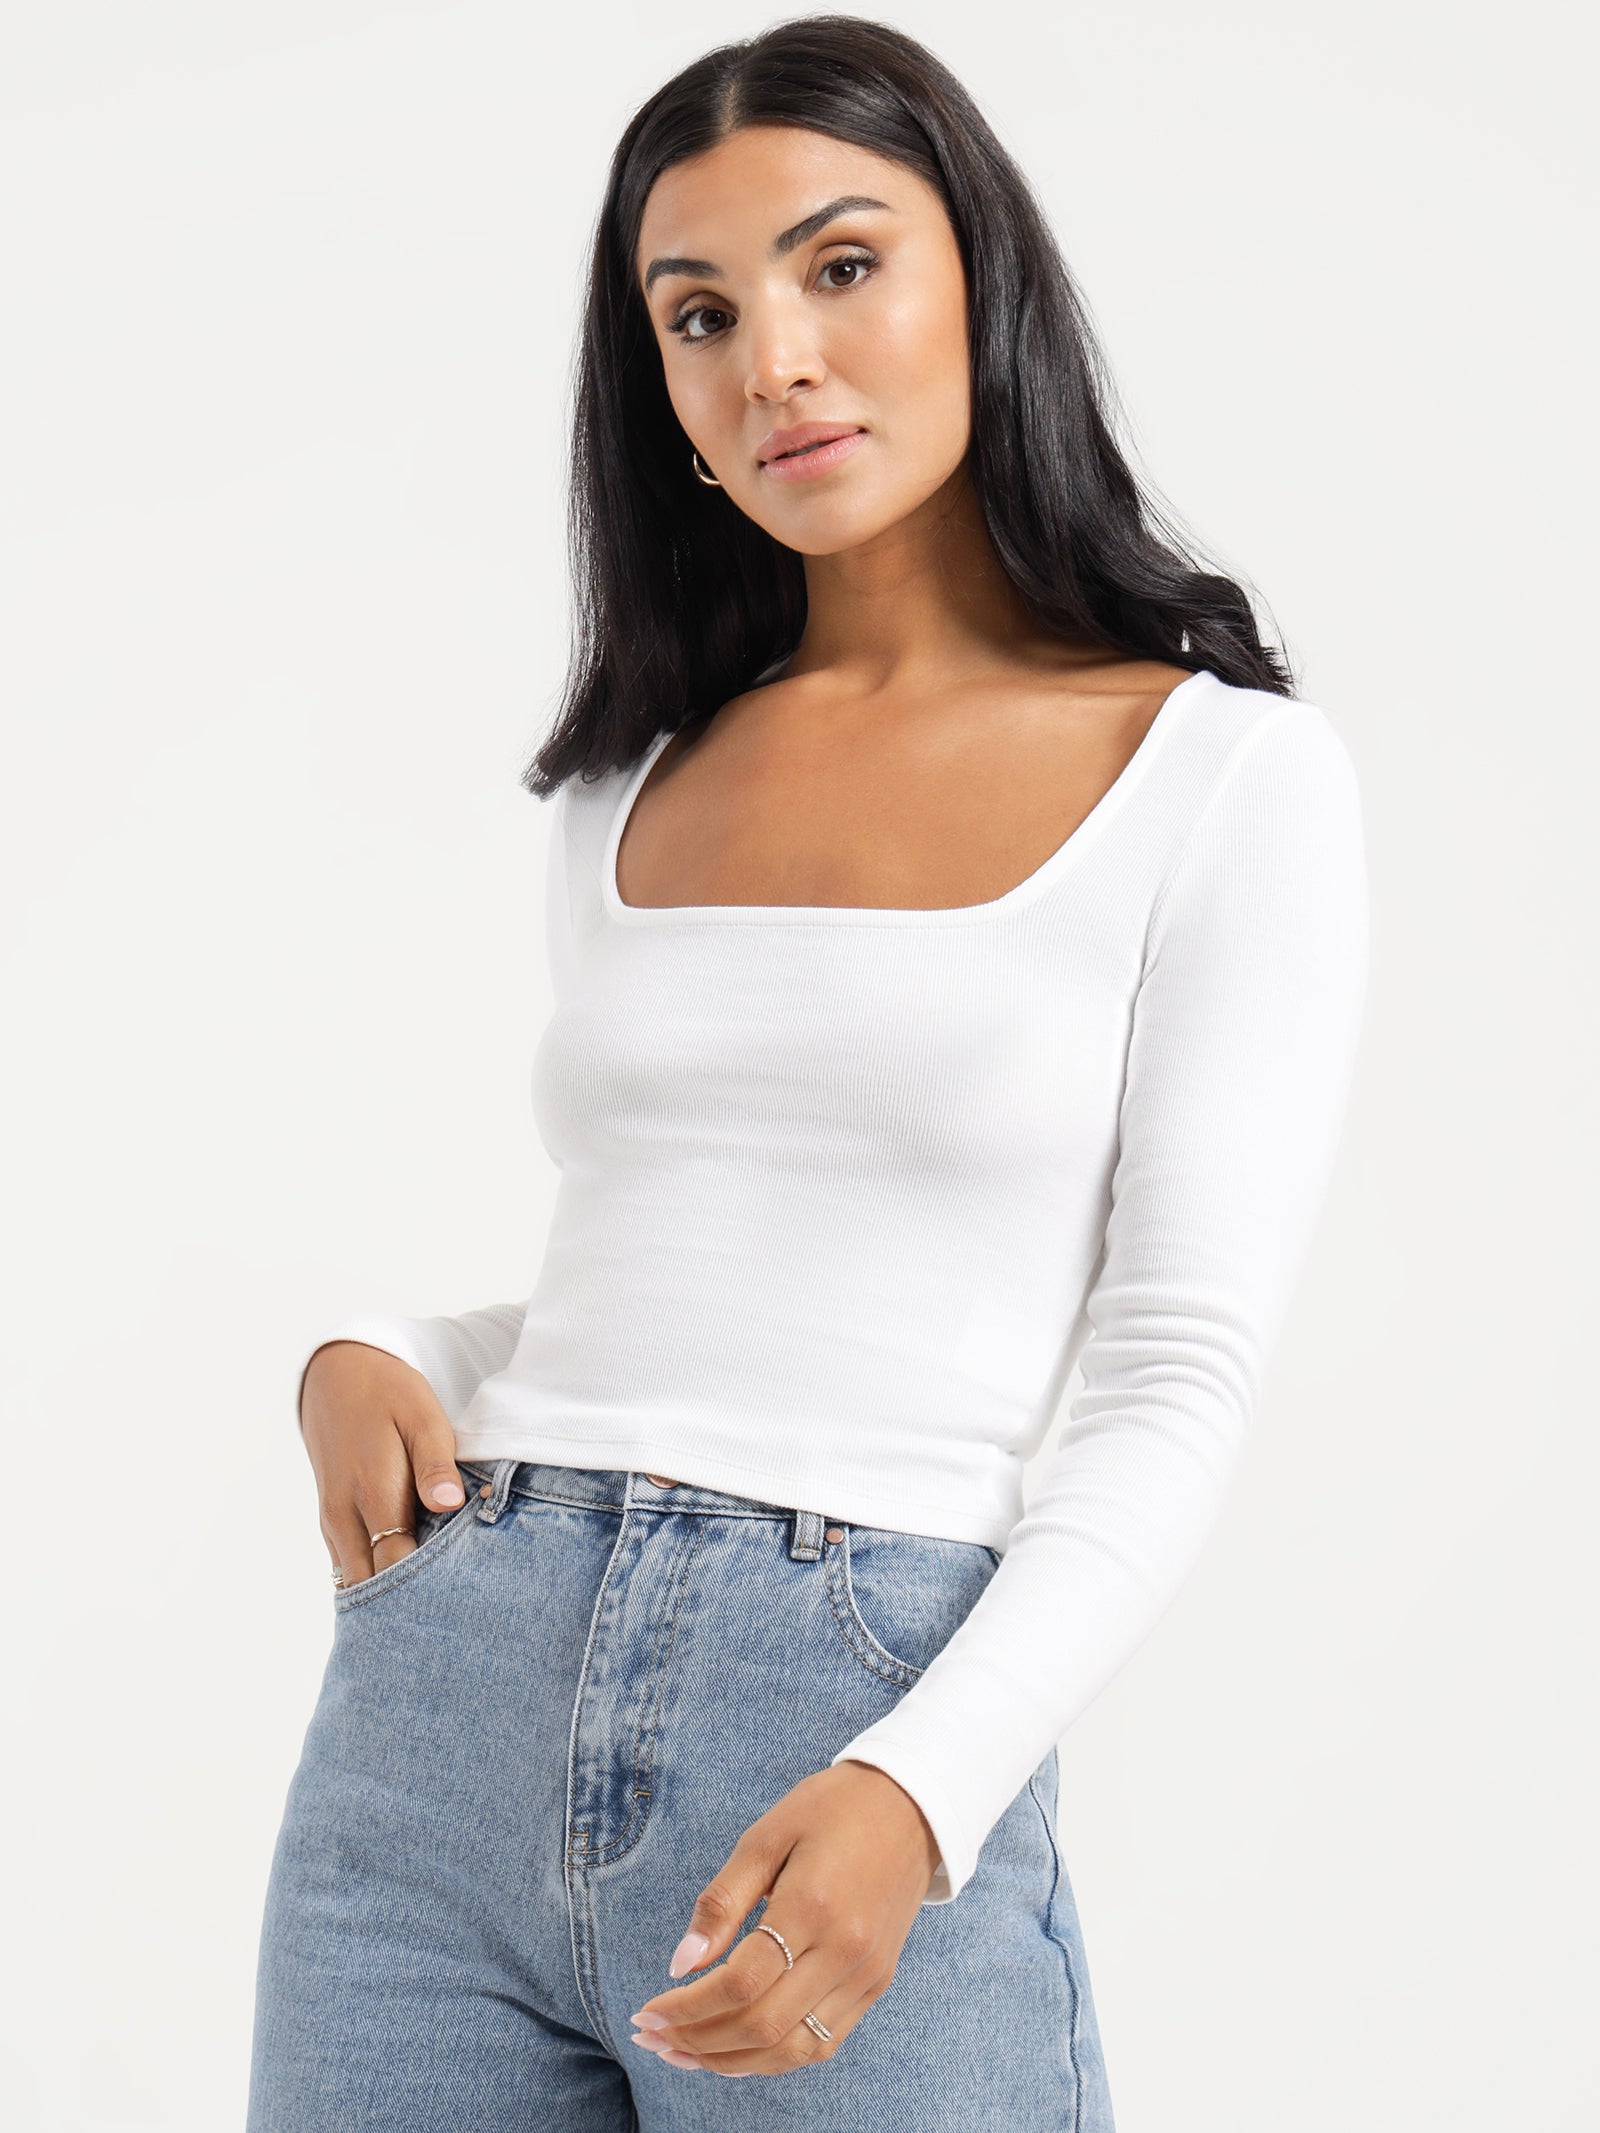 Marley Square Neck Top in White - Glue Store